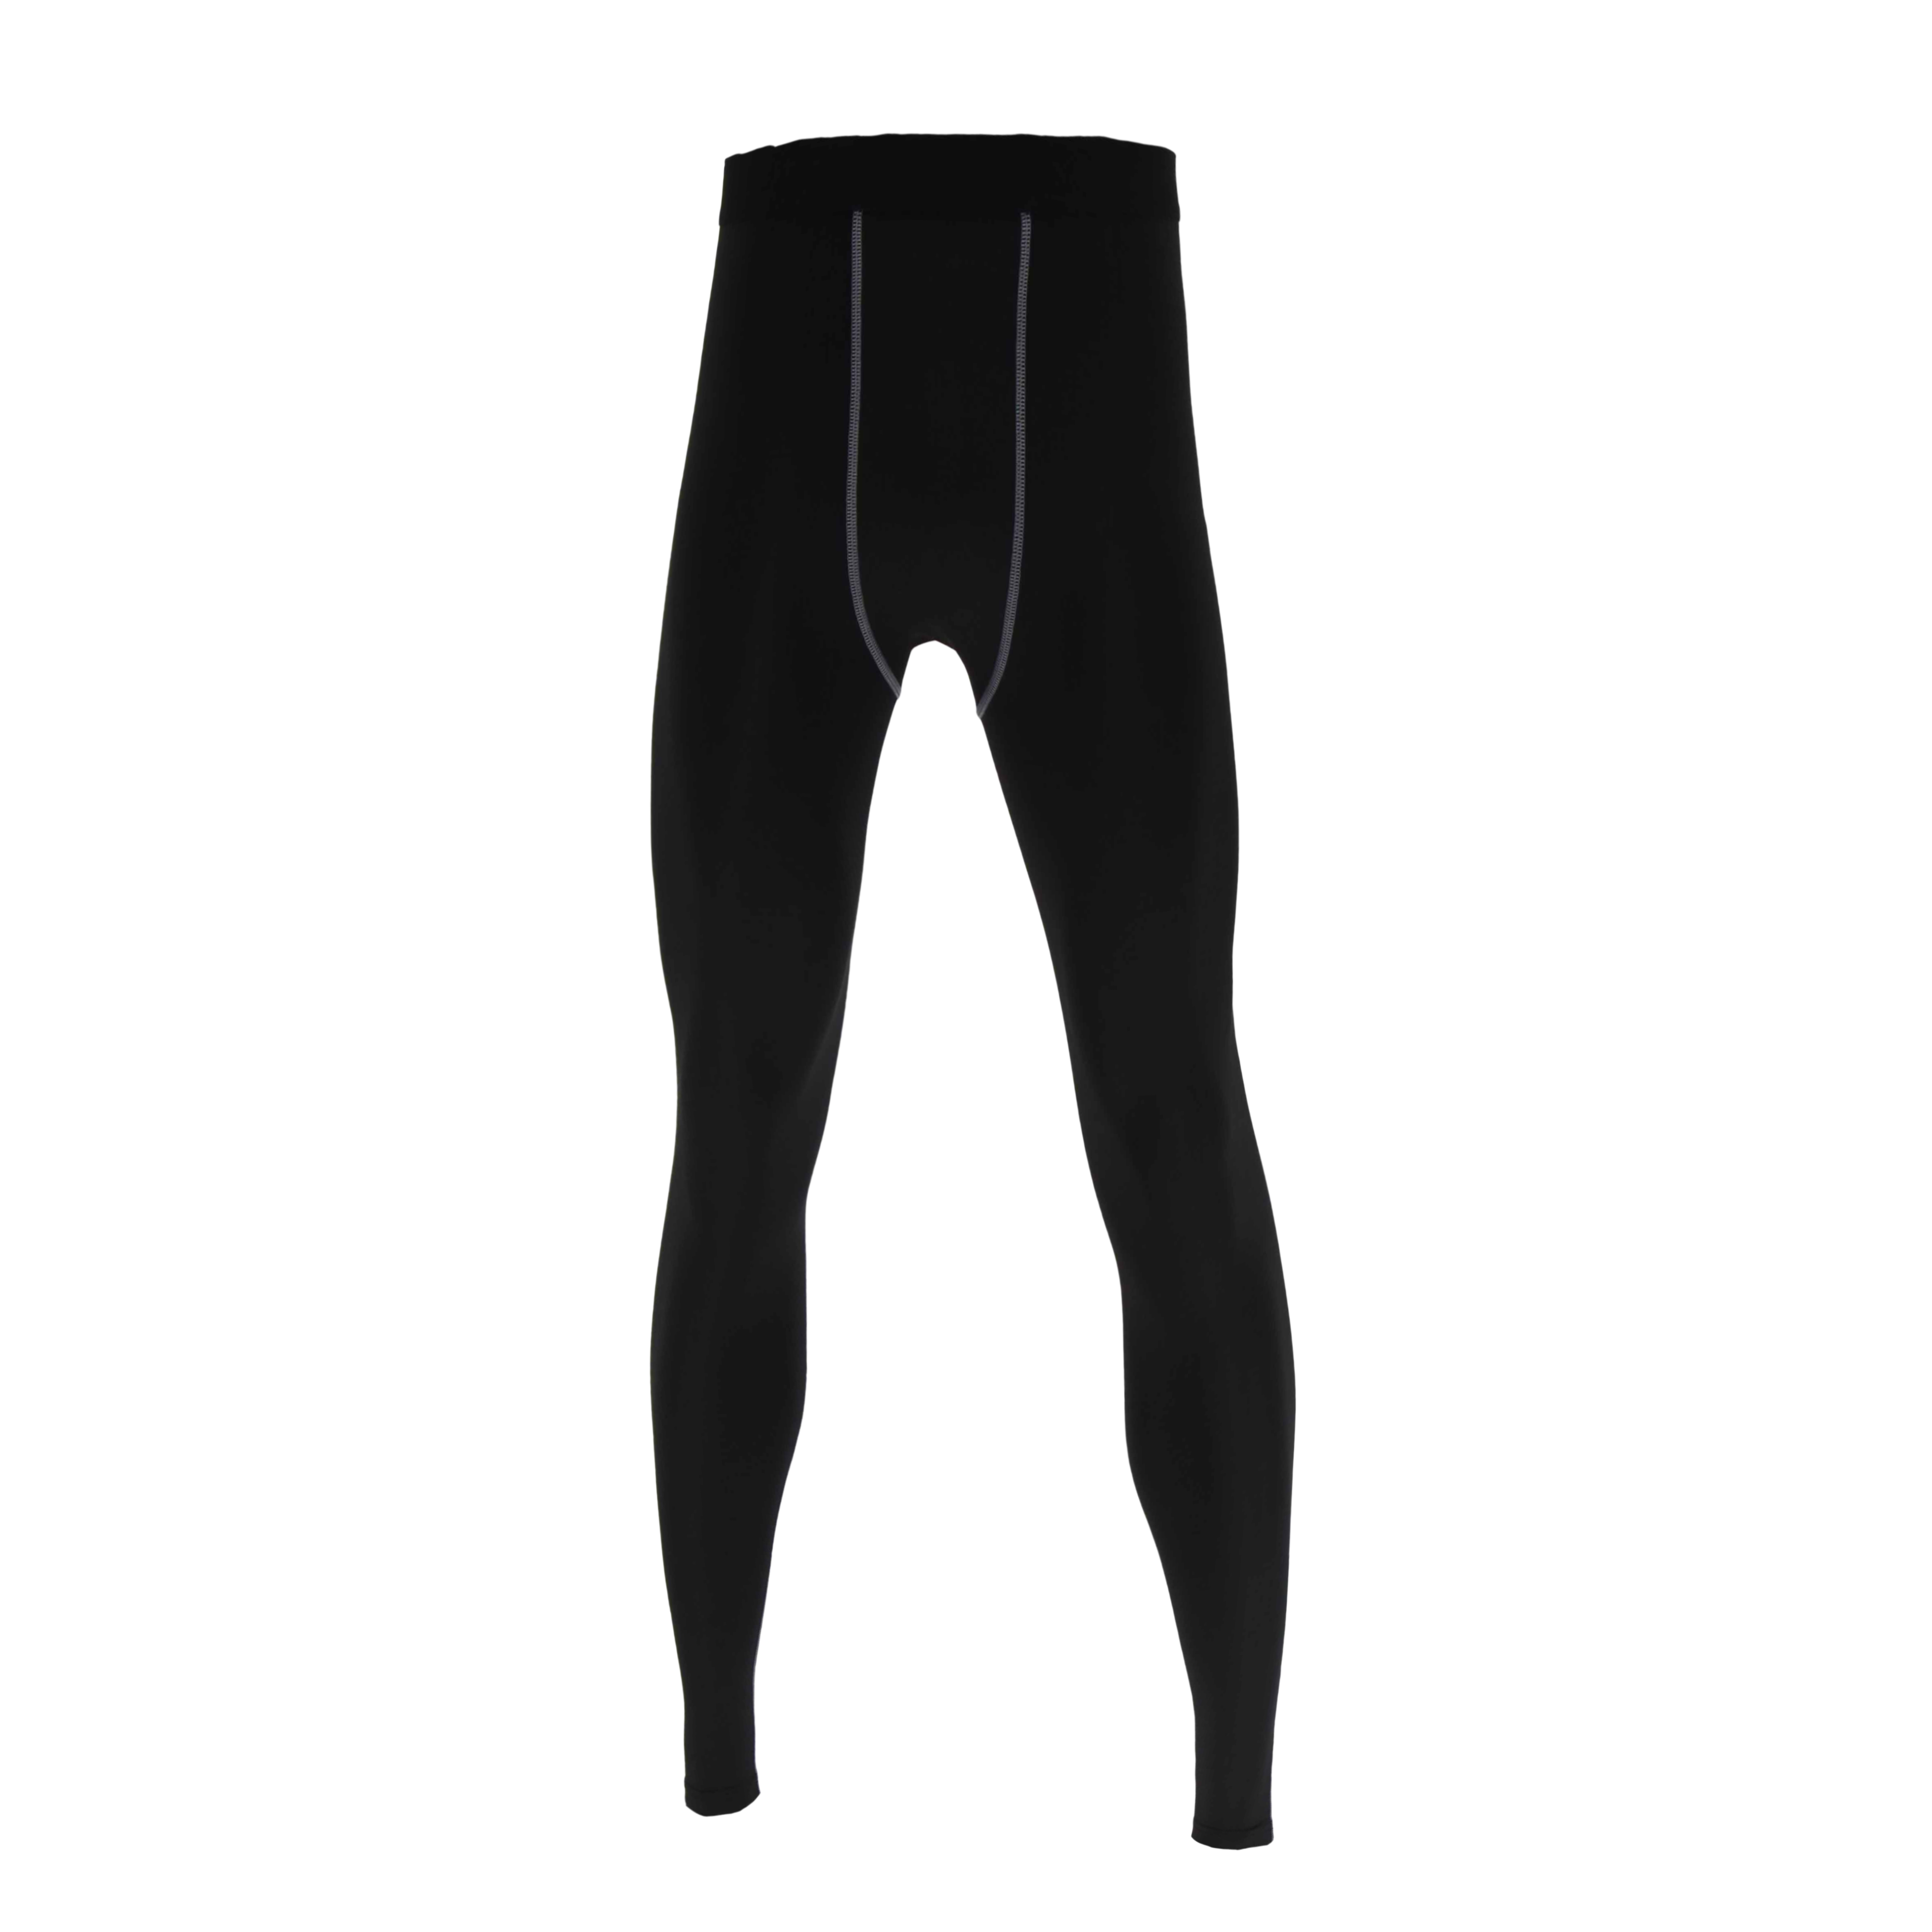 Mens + Youth Compression Tights Running Skins Kids Football